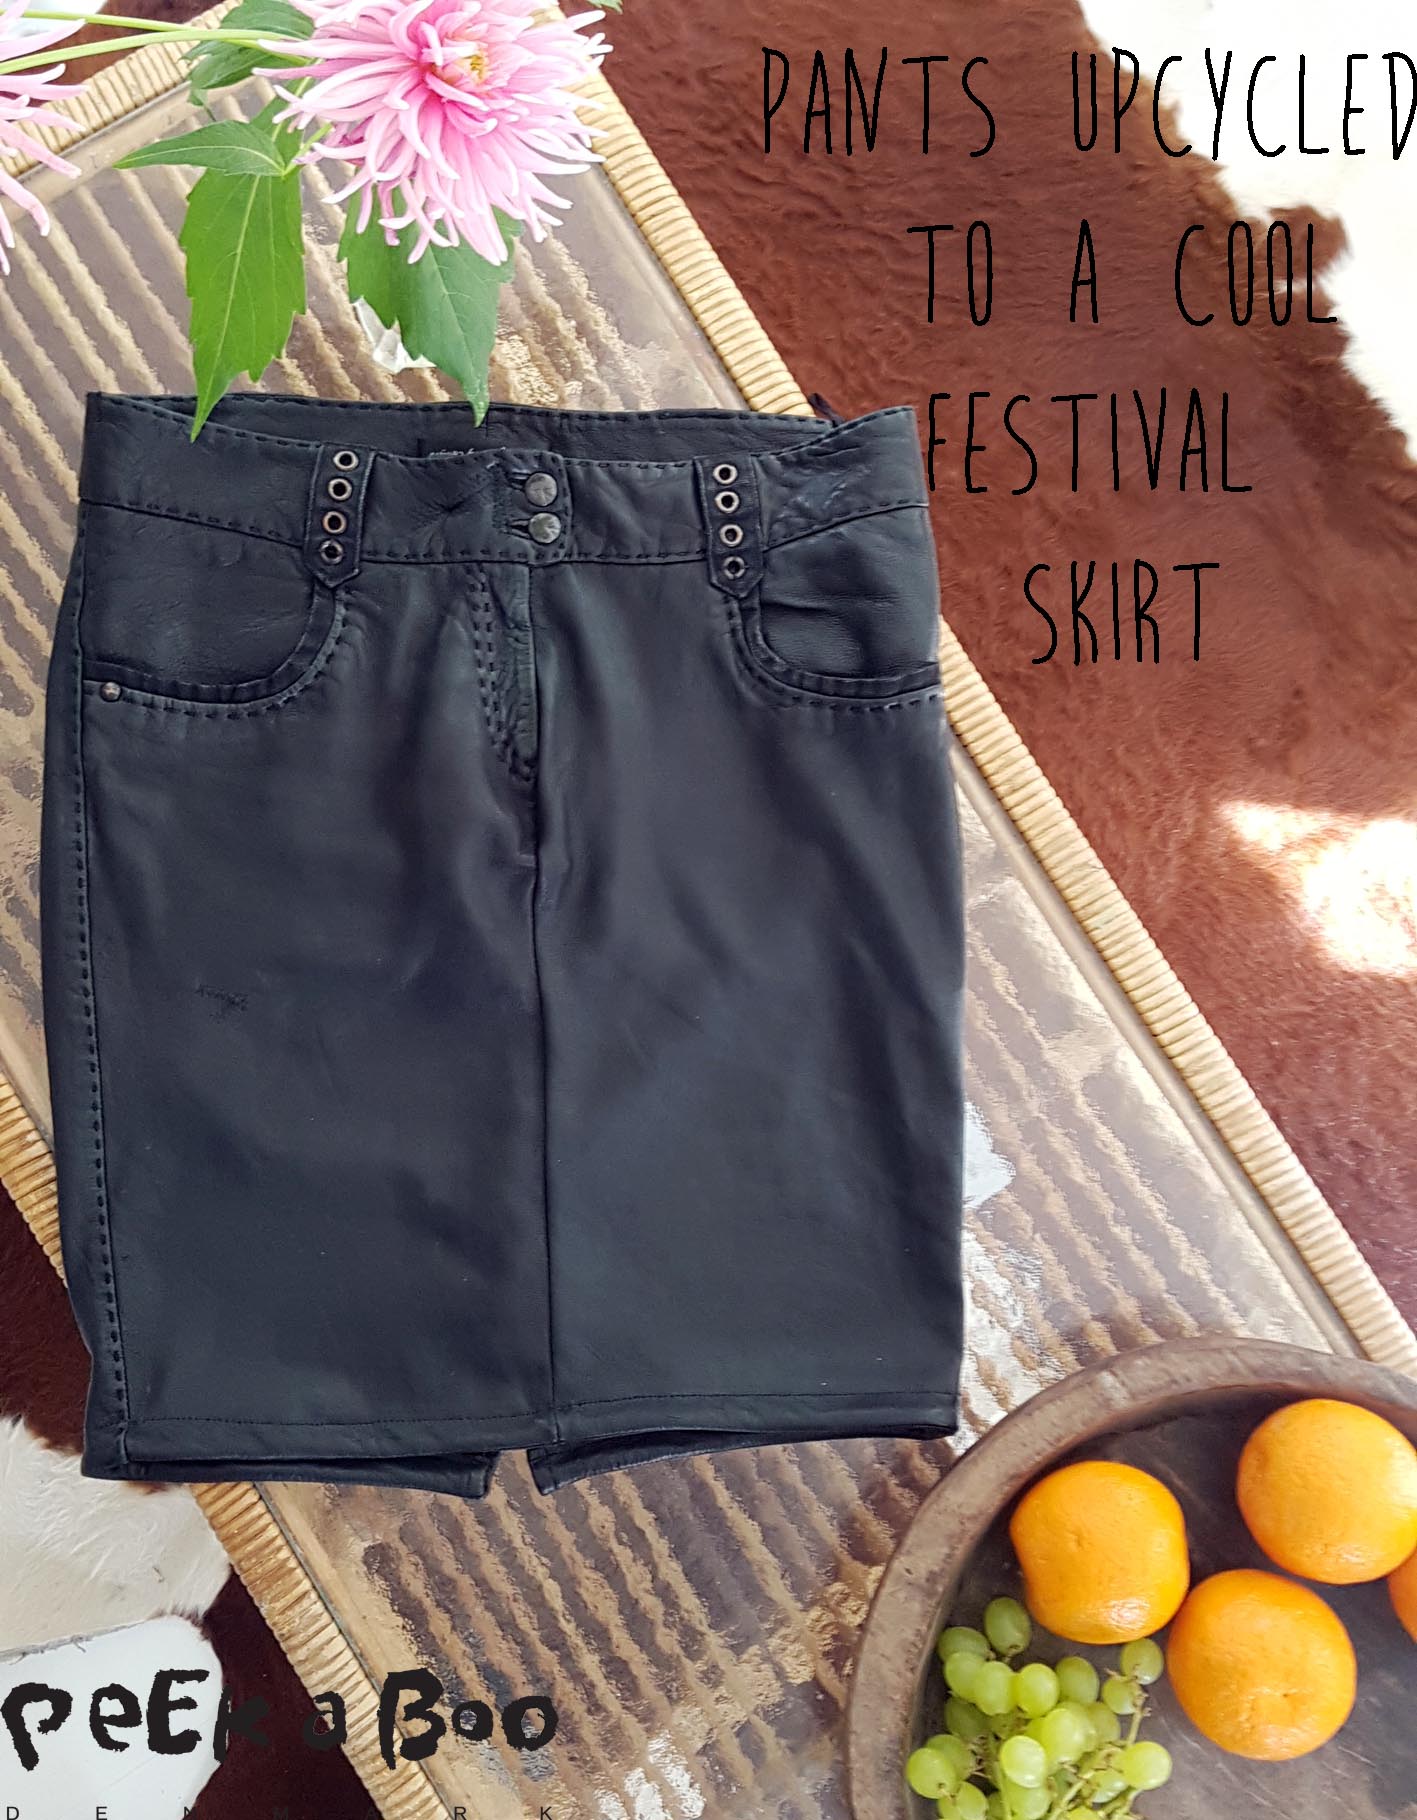 upcycled leather pants, now a cool leather skirt...